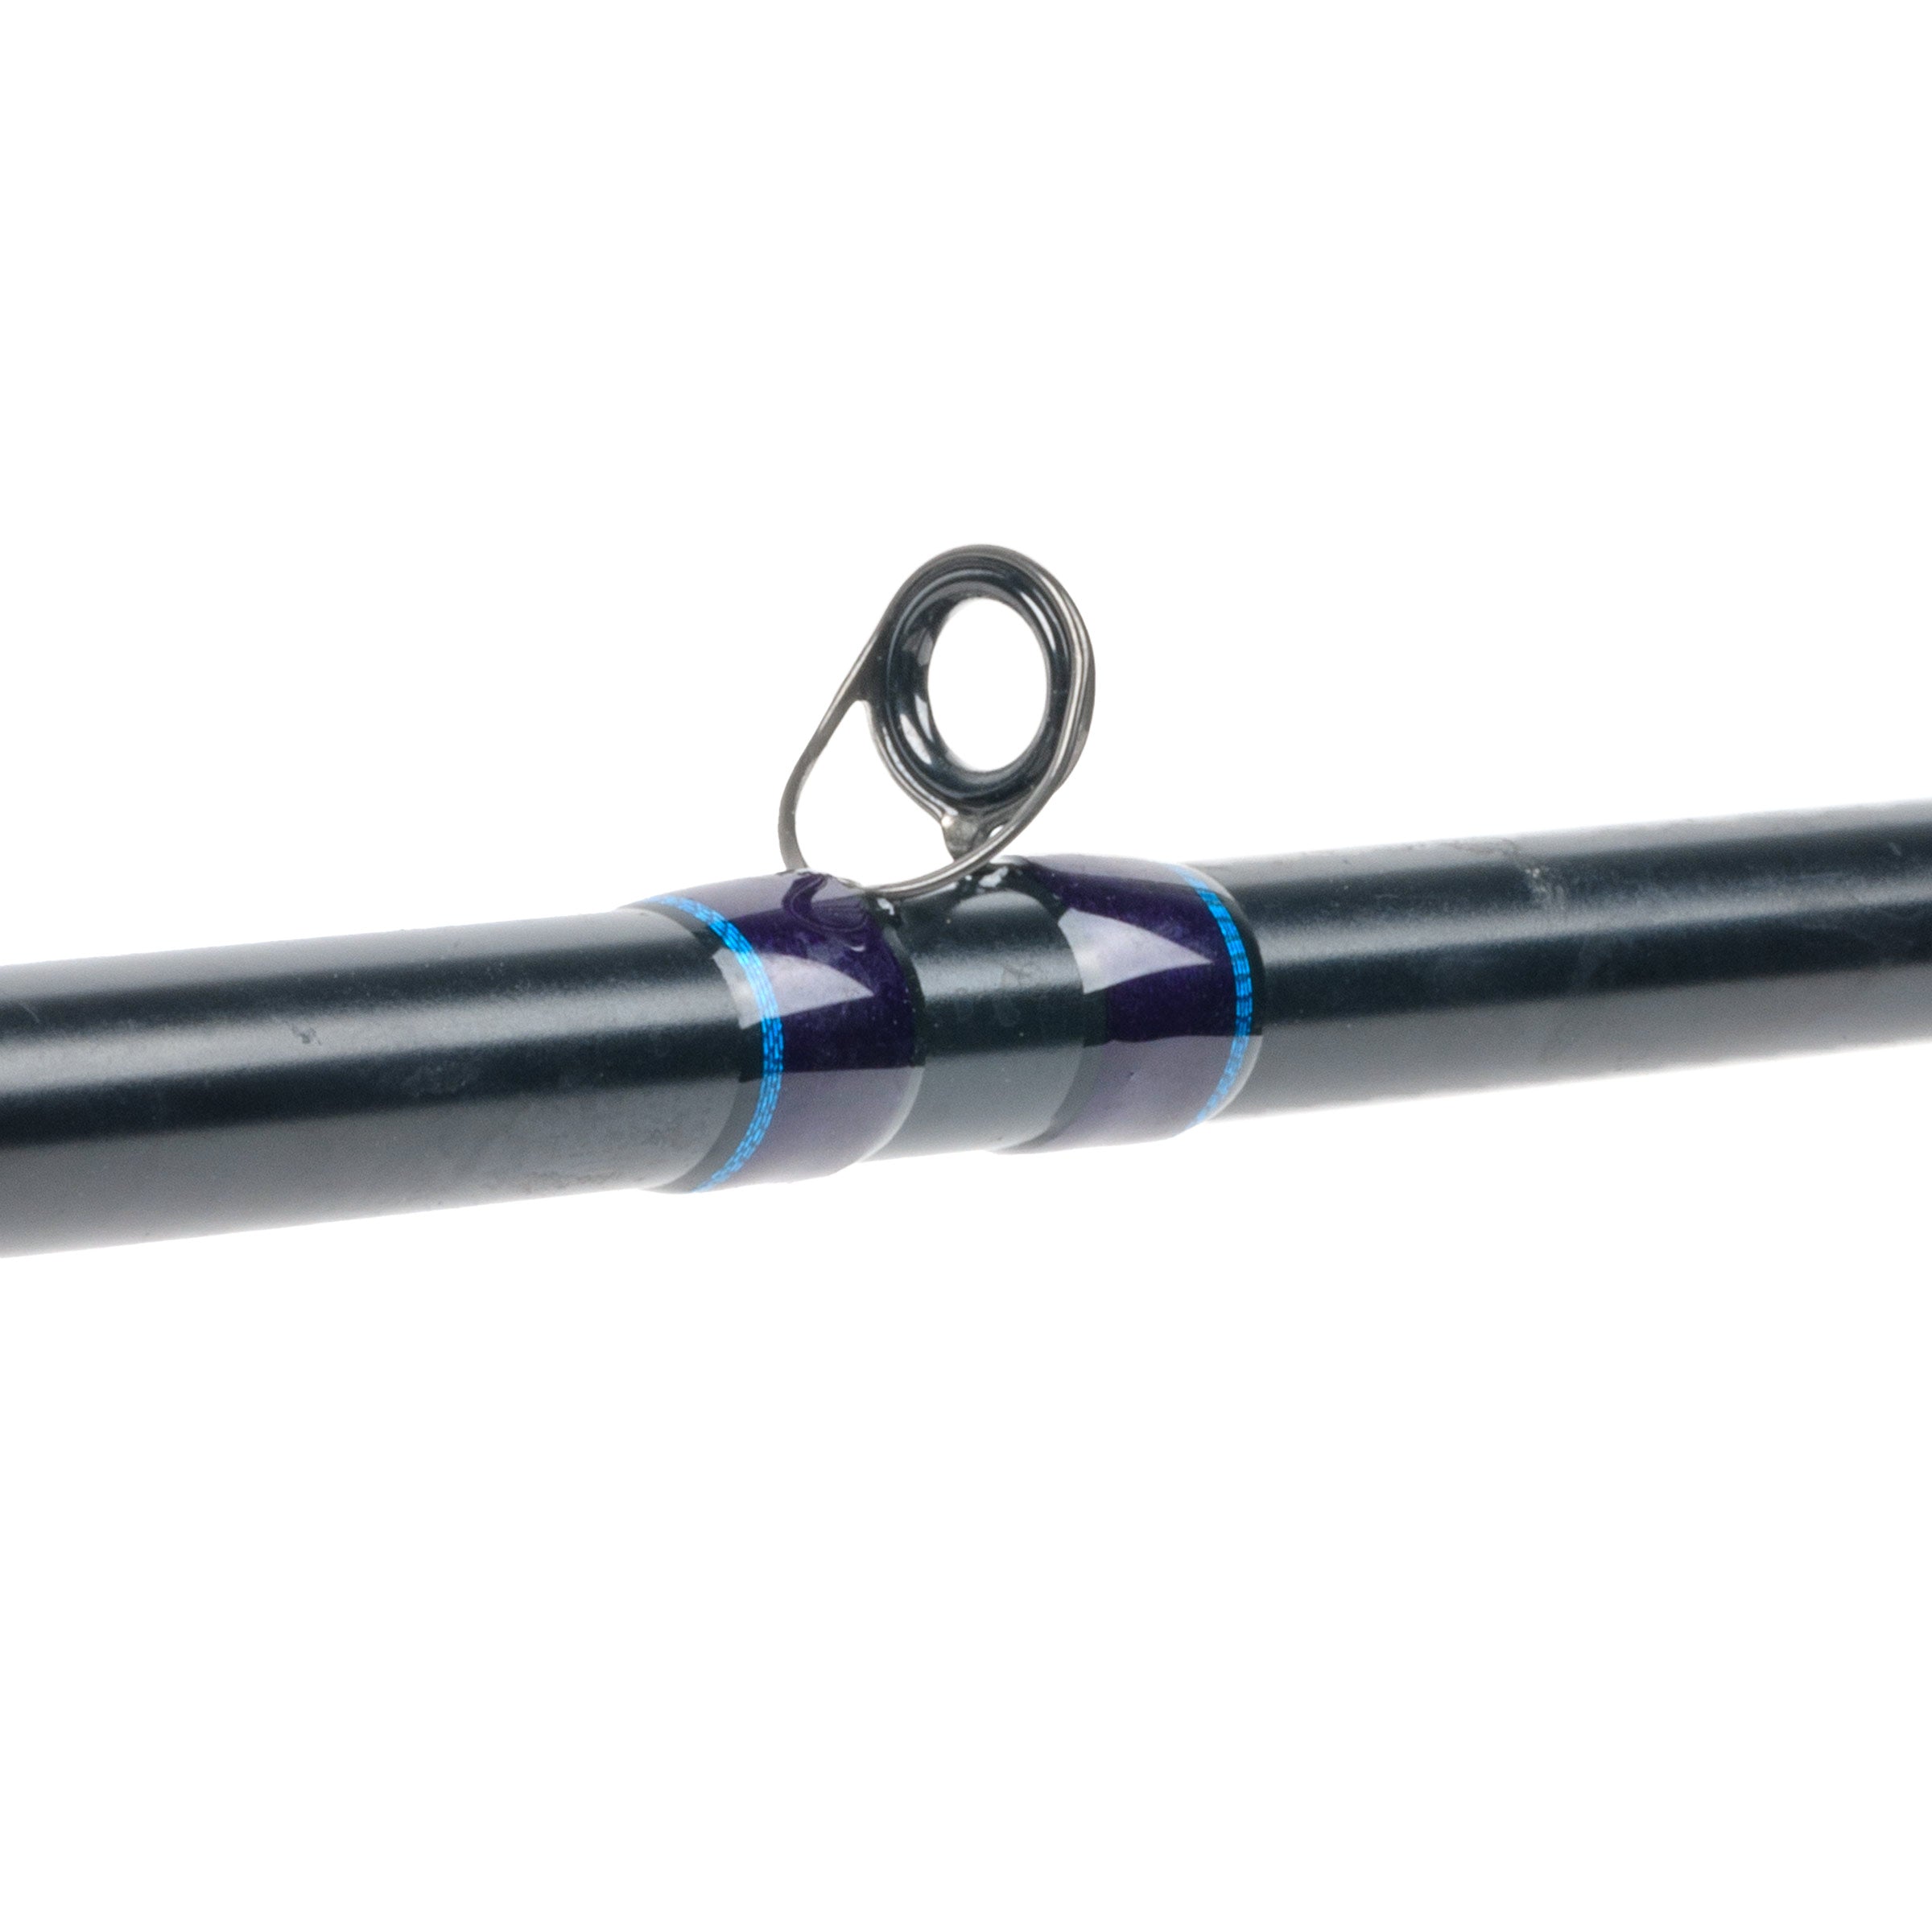 Jake's Drain Rod 7'2” Med-Heavy All Around Bass Fishing Rod Component